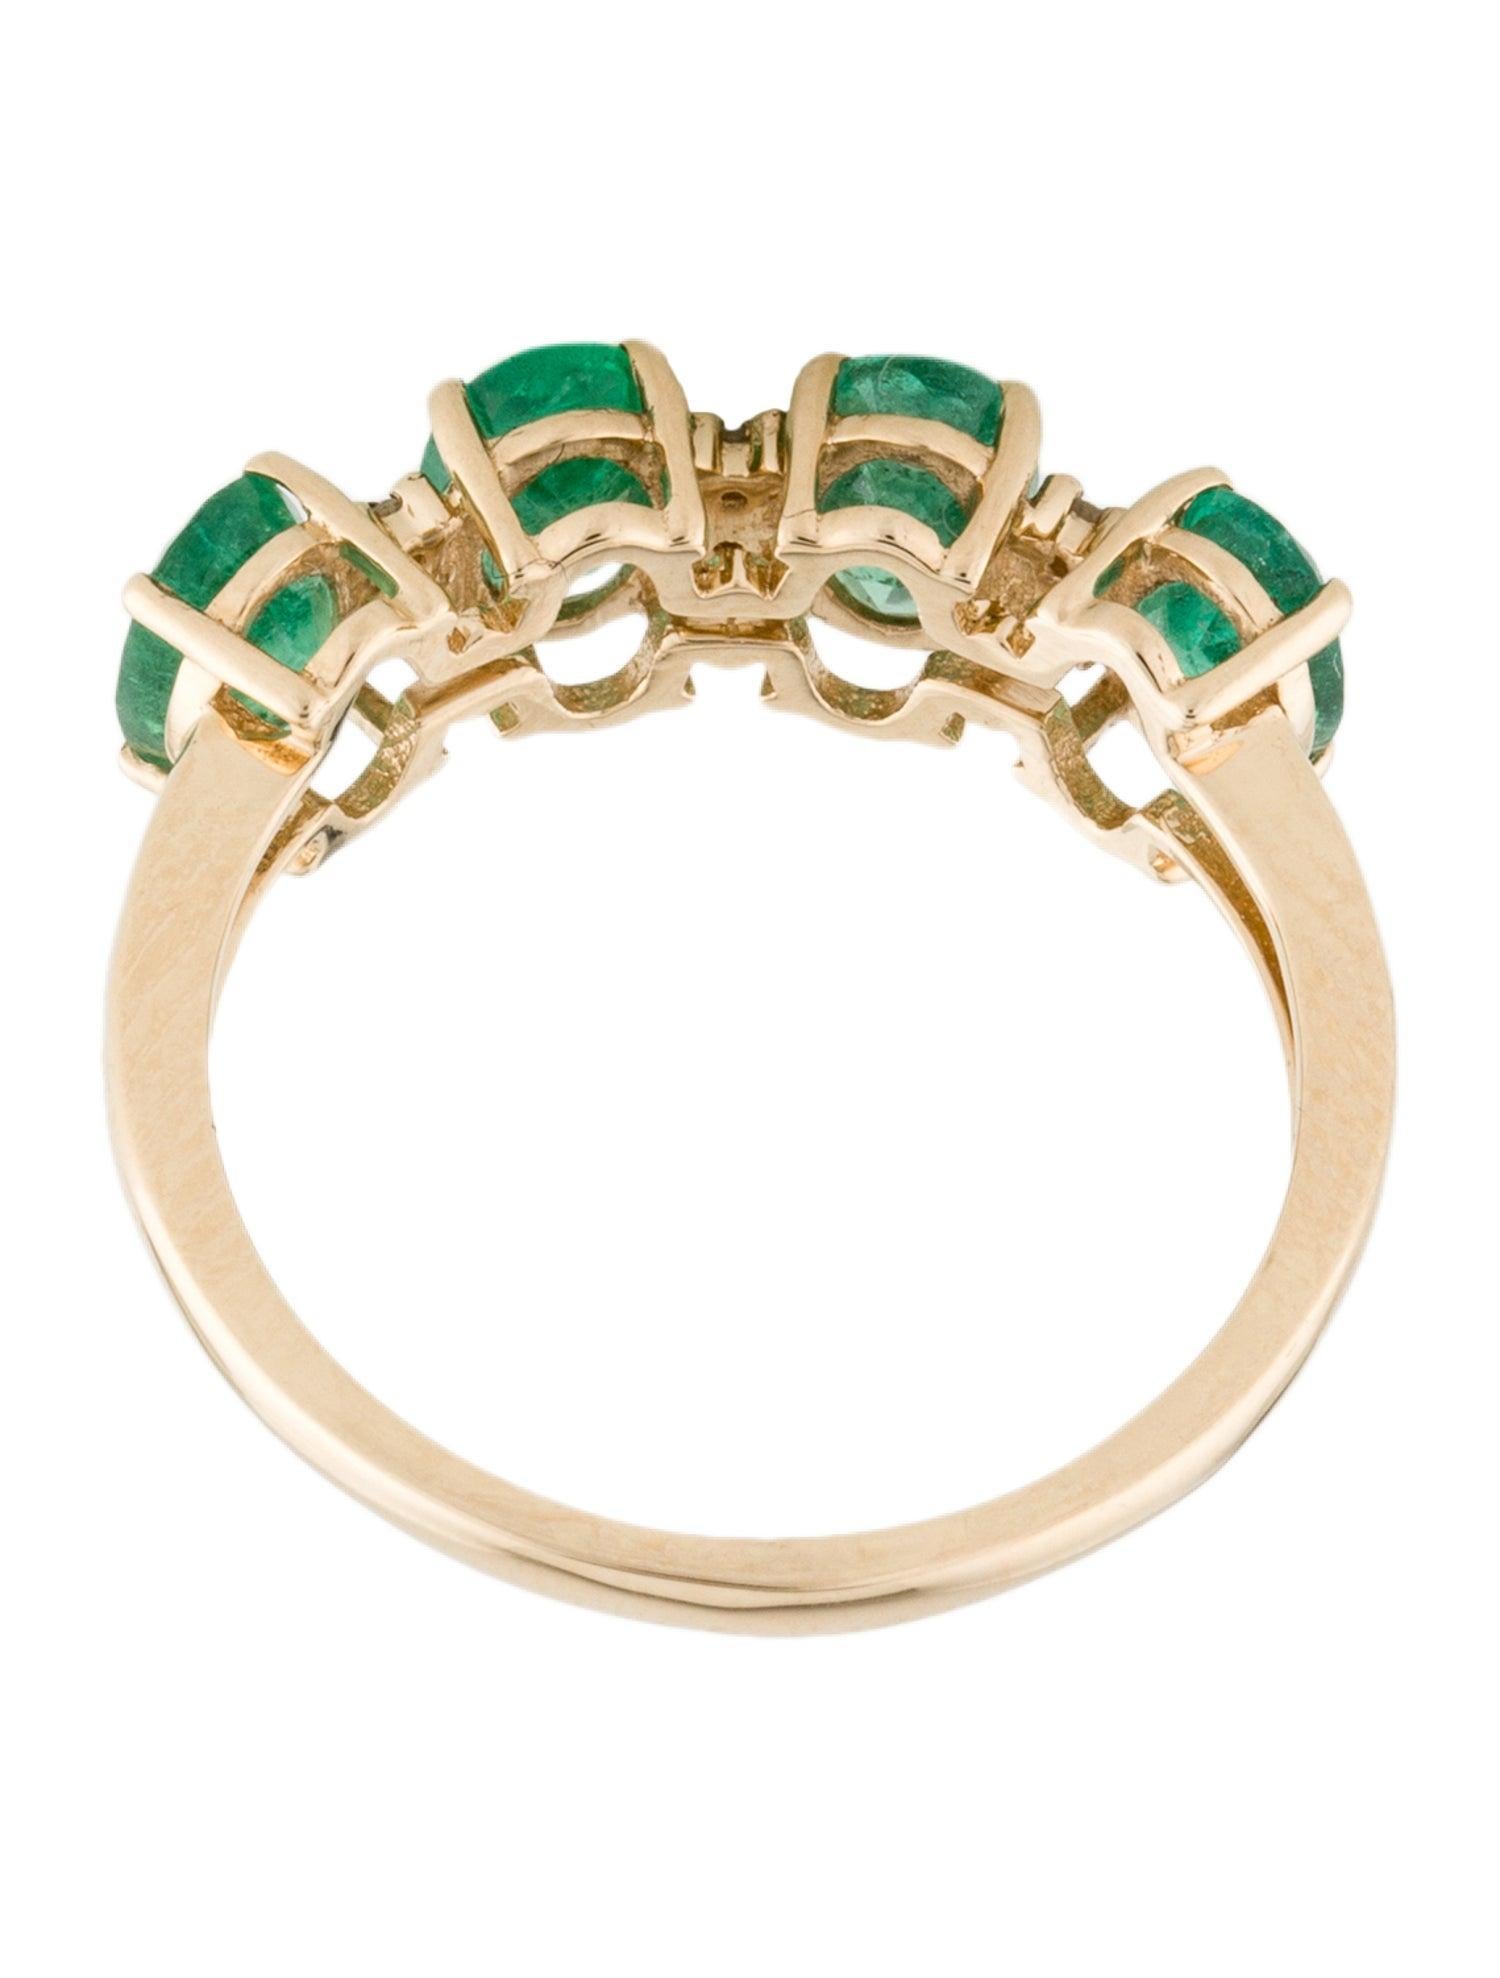 Stunning 14K Gold 1.87ctw Emerald & Diamond Band Size 6.75 - Elegant & Timeless In New Condition For Sale In Holtsville, NY